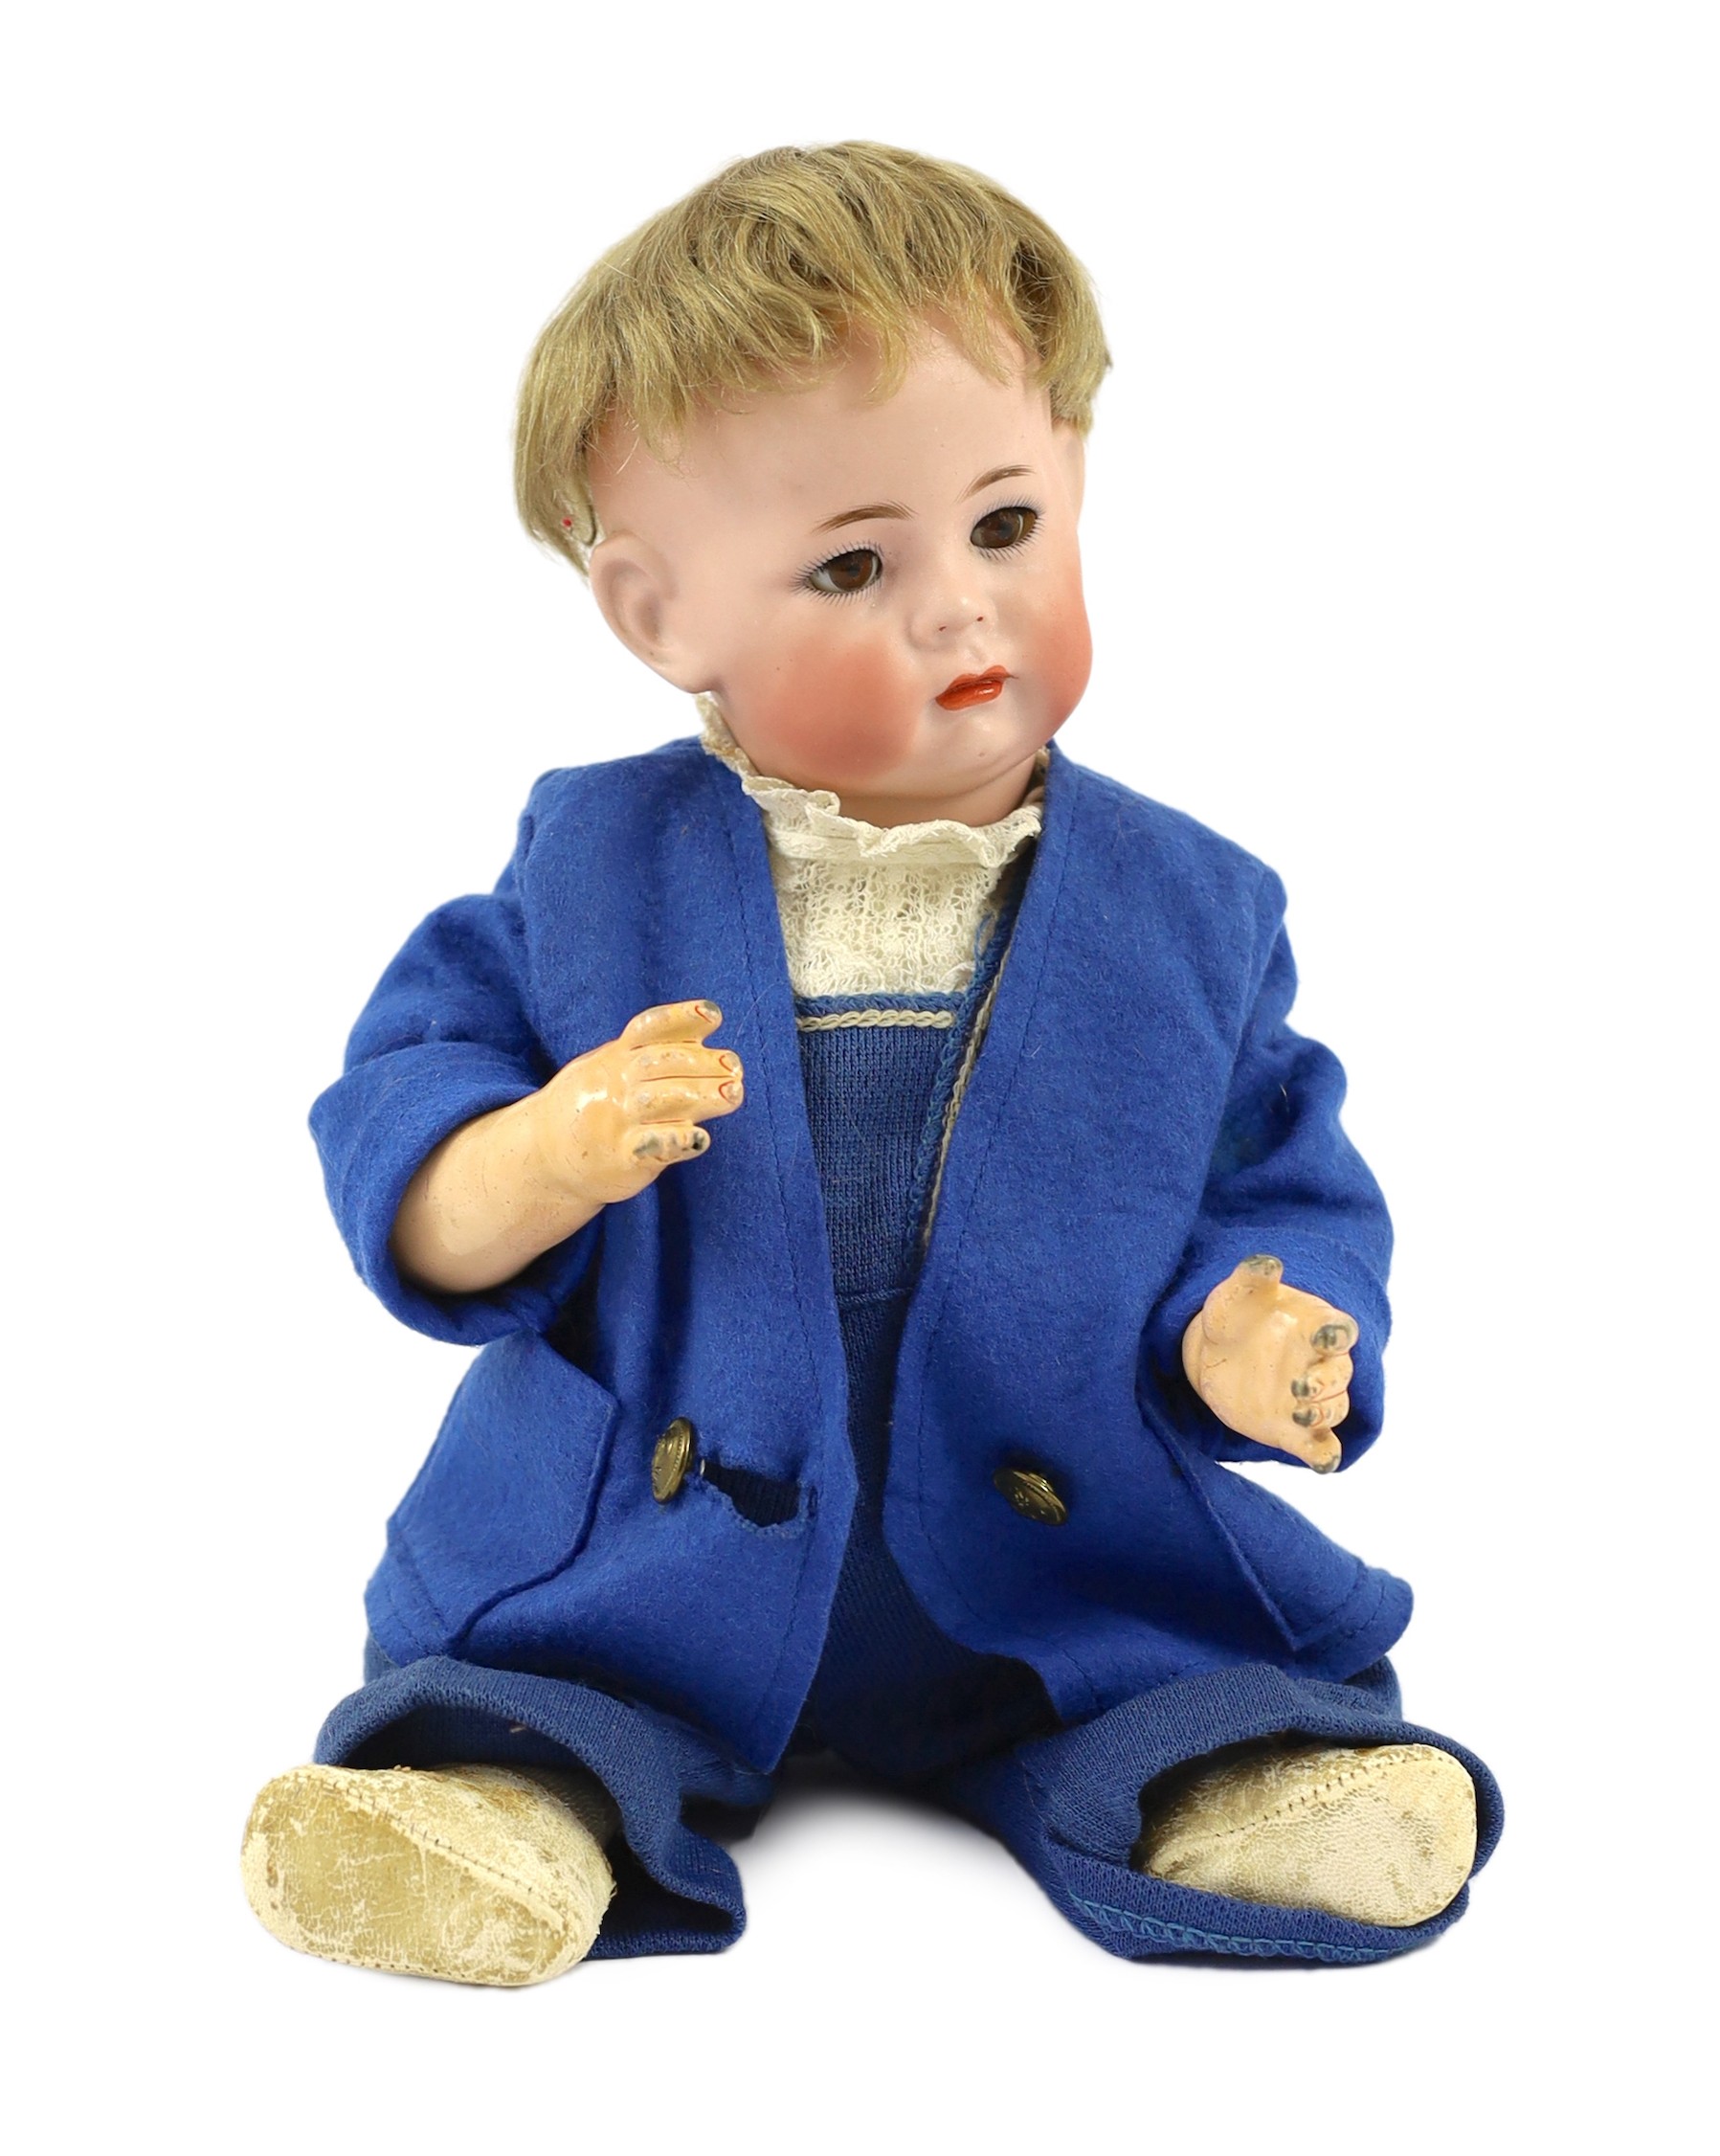 A Kammer & Reinhardt / Simon & Halbig bisque character doll, German, circa 1911, 13in.